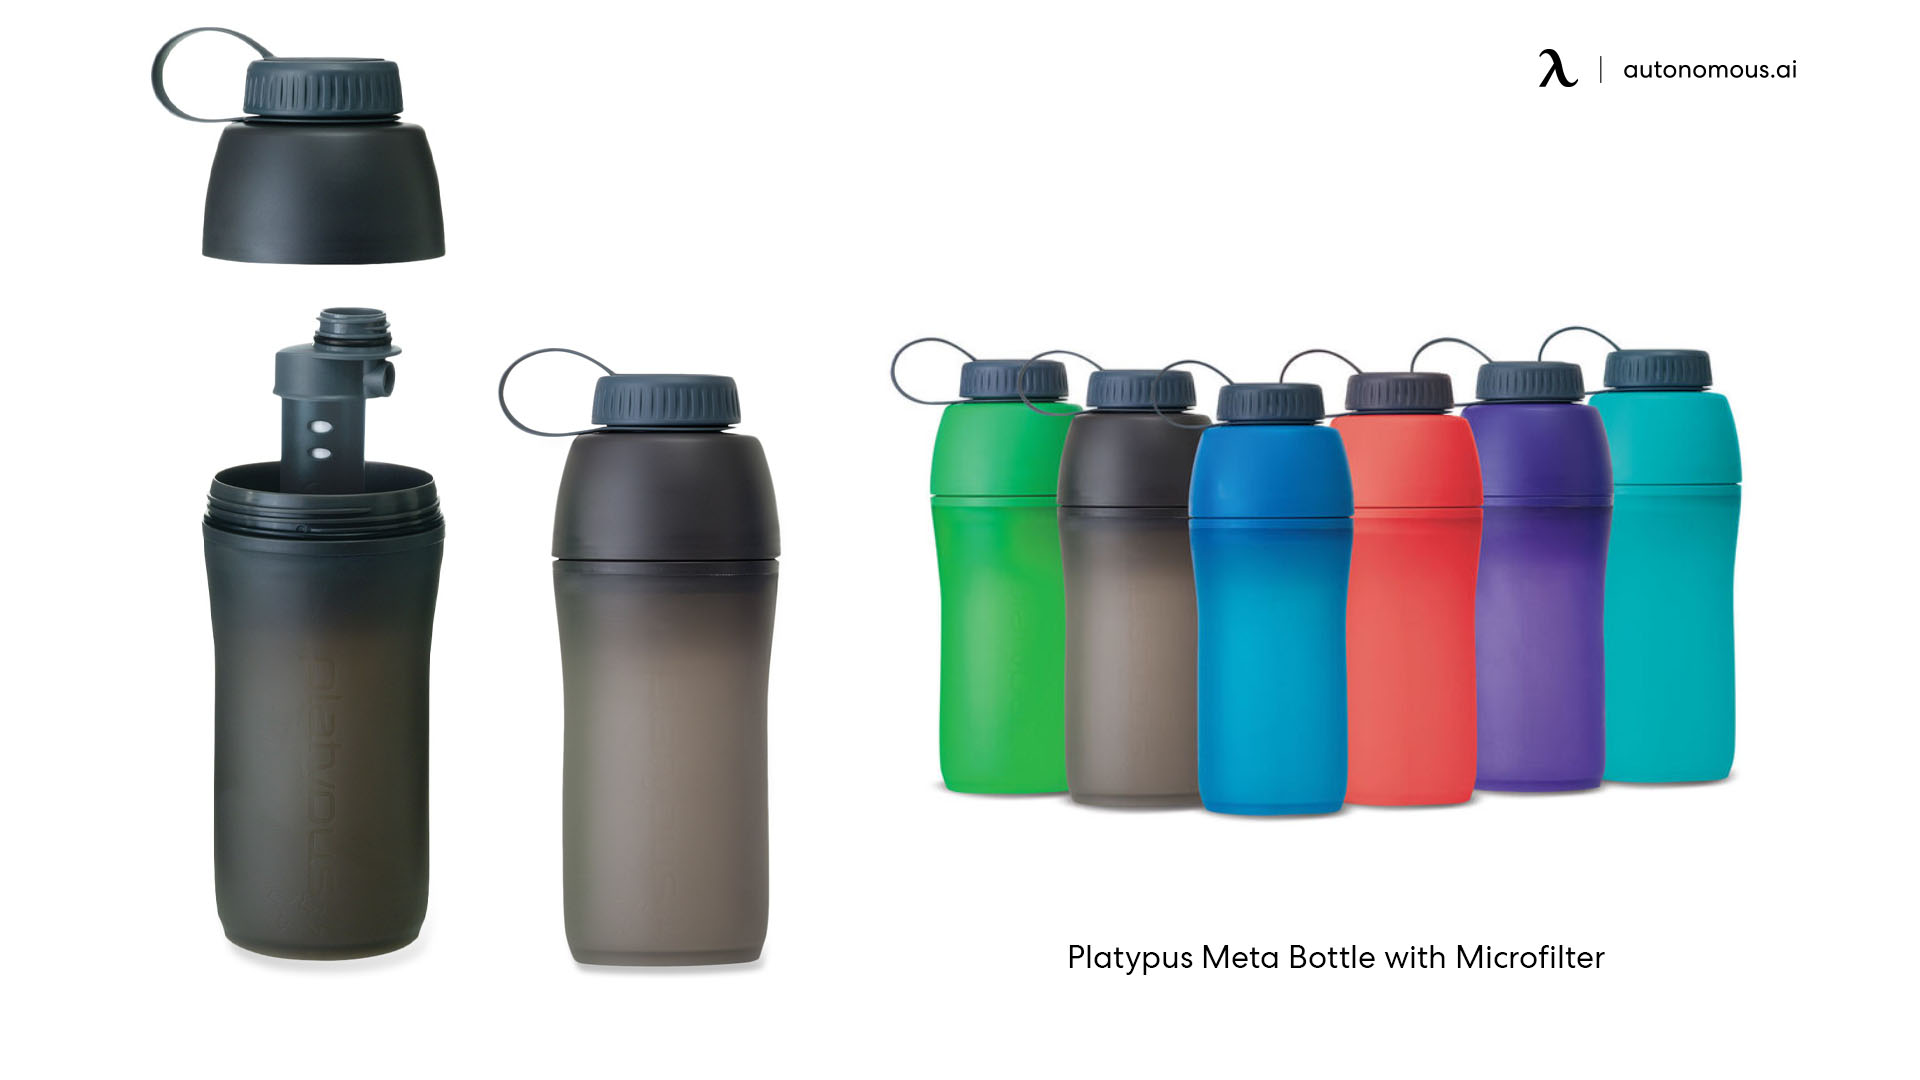 Platypus filtered water bottle with Microfilter